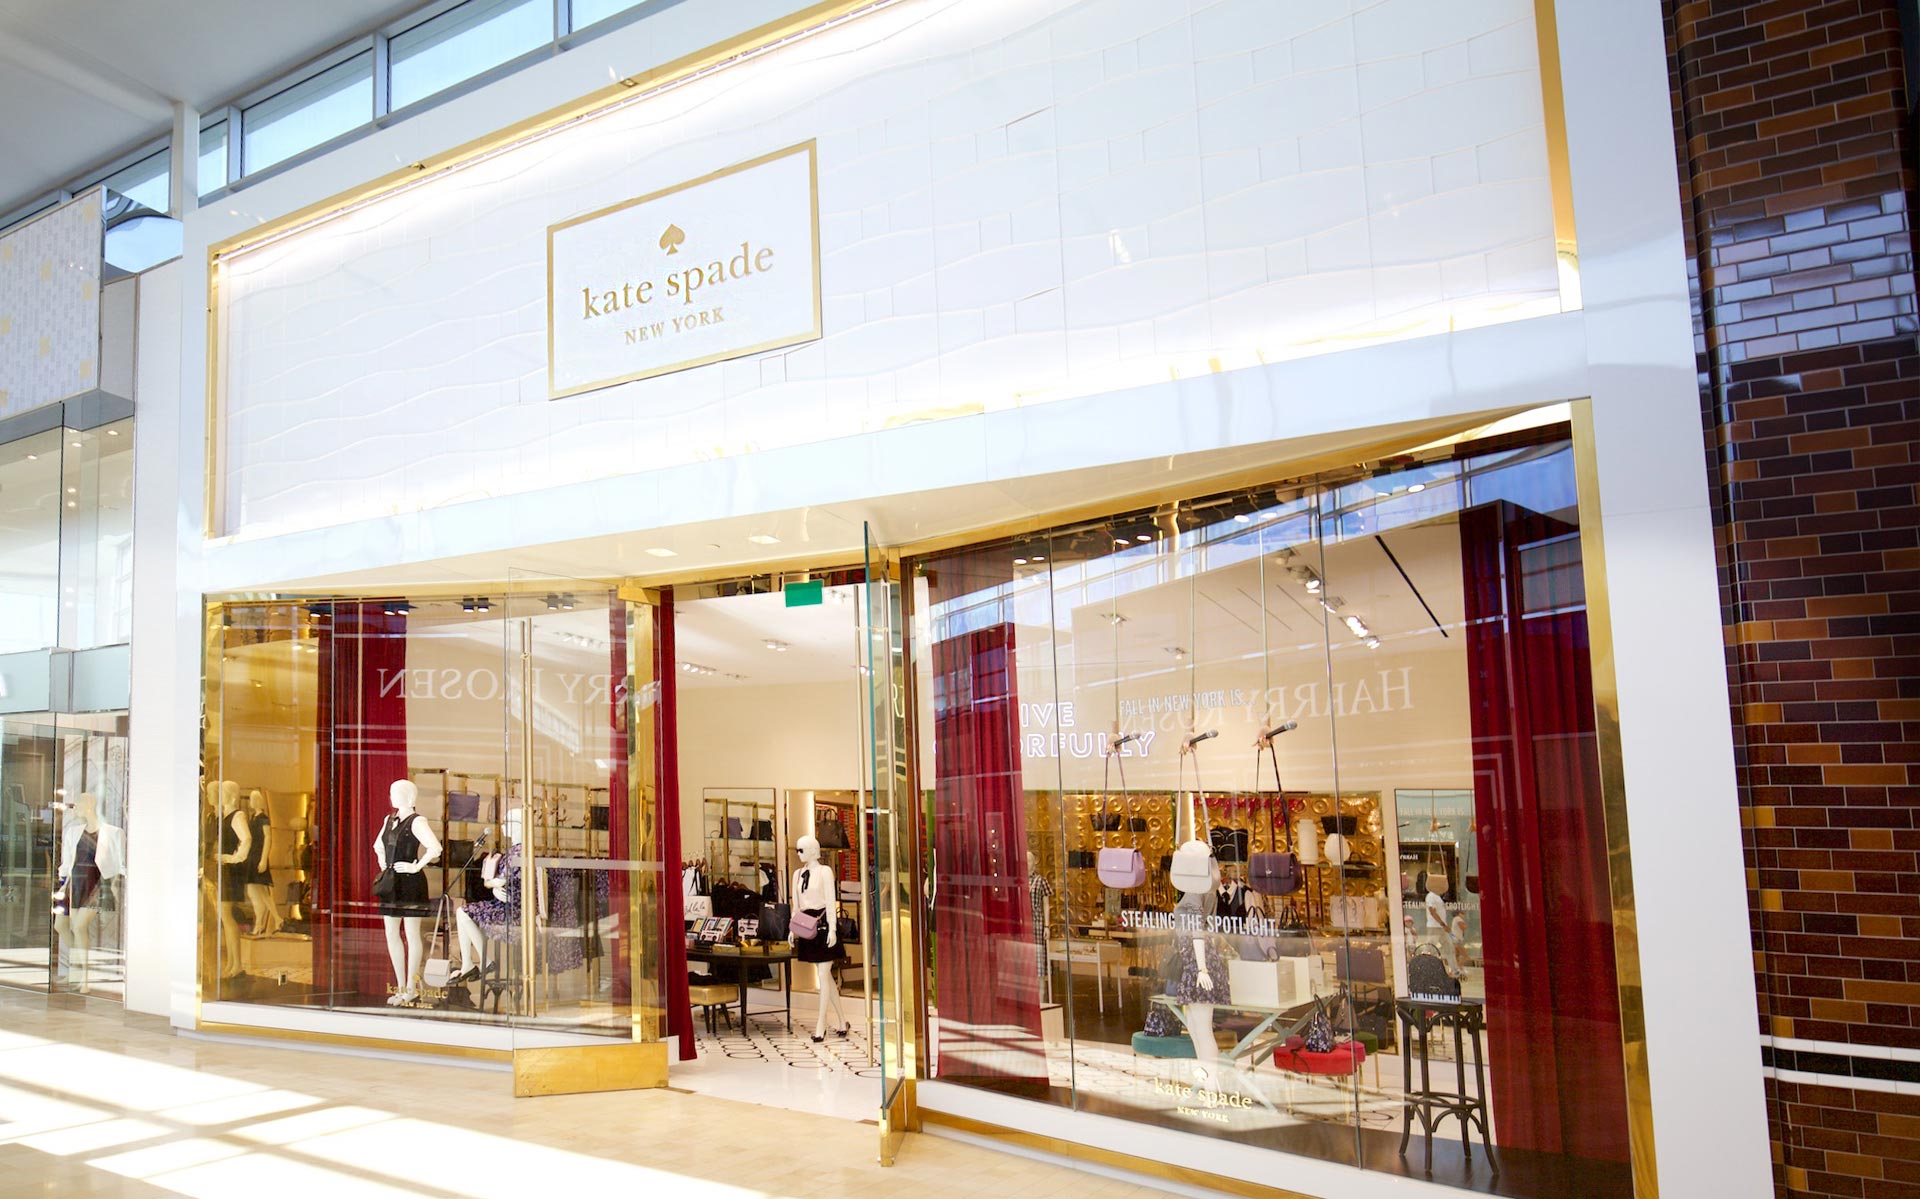 COACH TO ACQUIRE KATE SPADE - Apparel